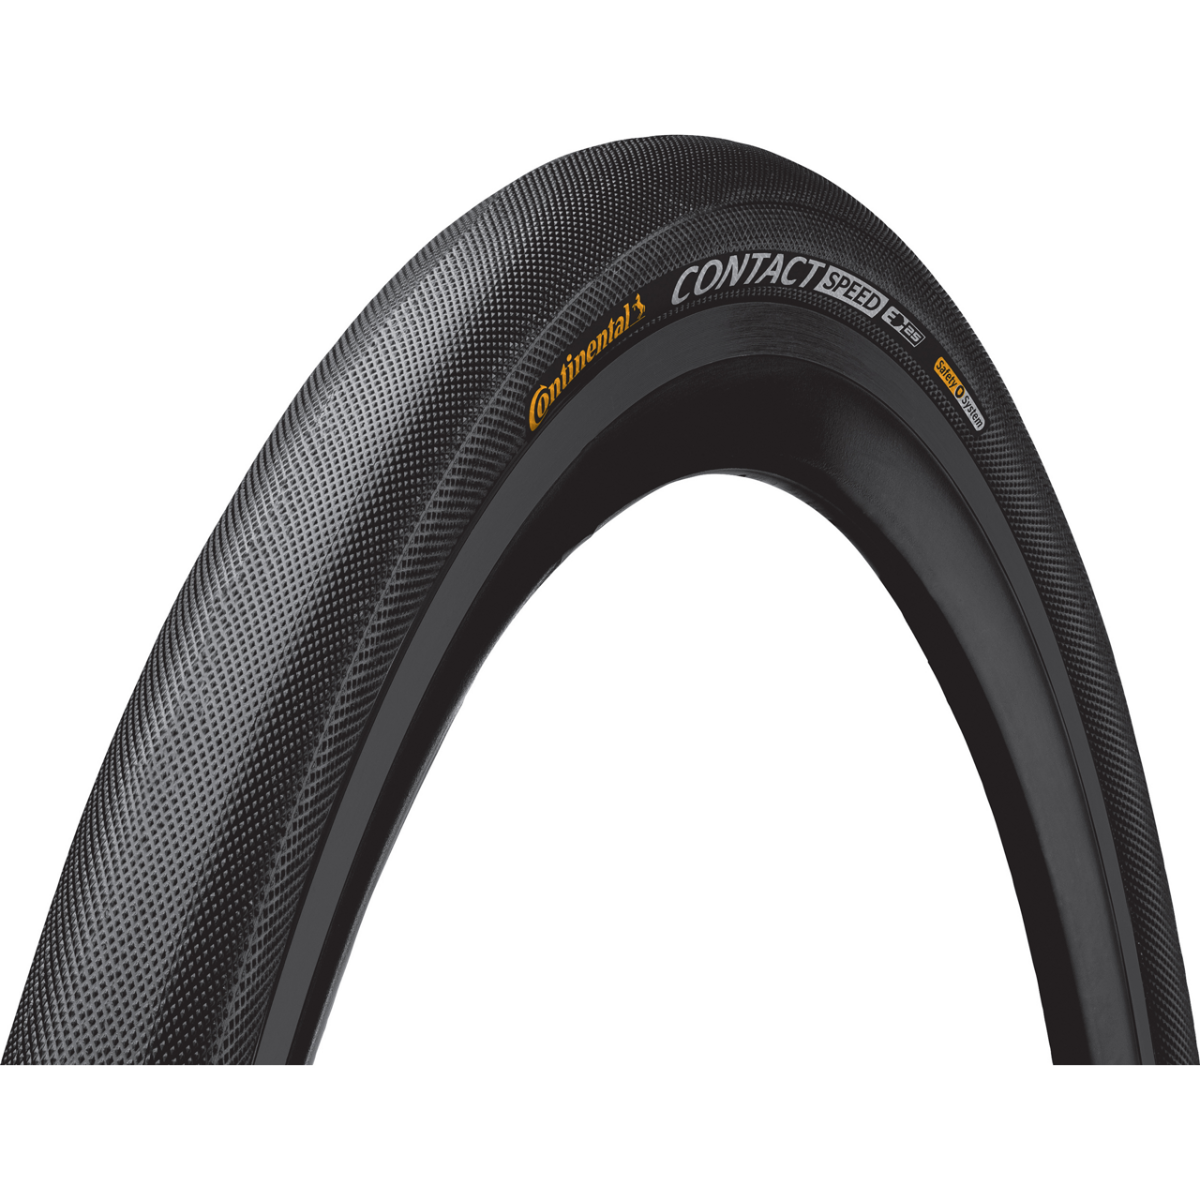 Riepa Continental 42-622 Contact Speed black/black wire skin